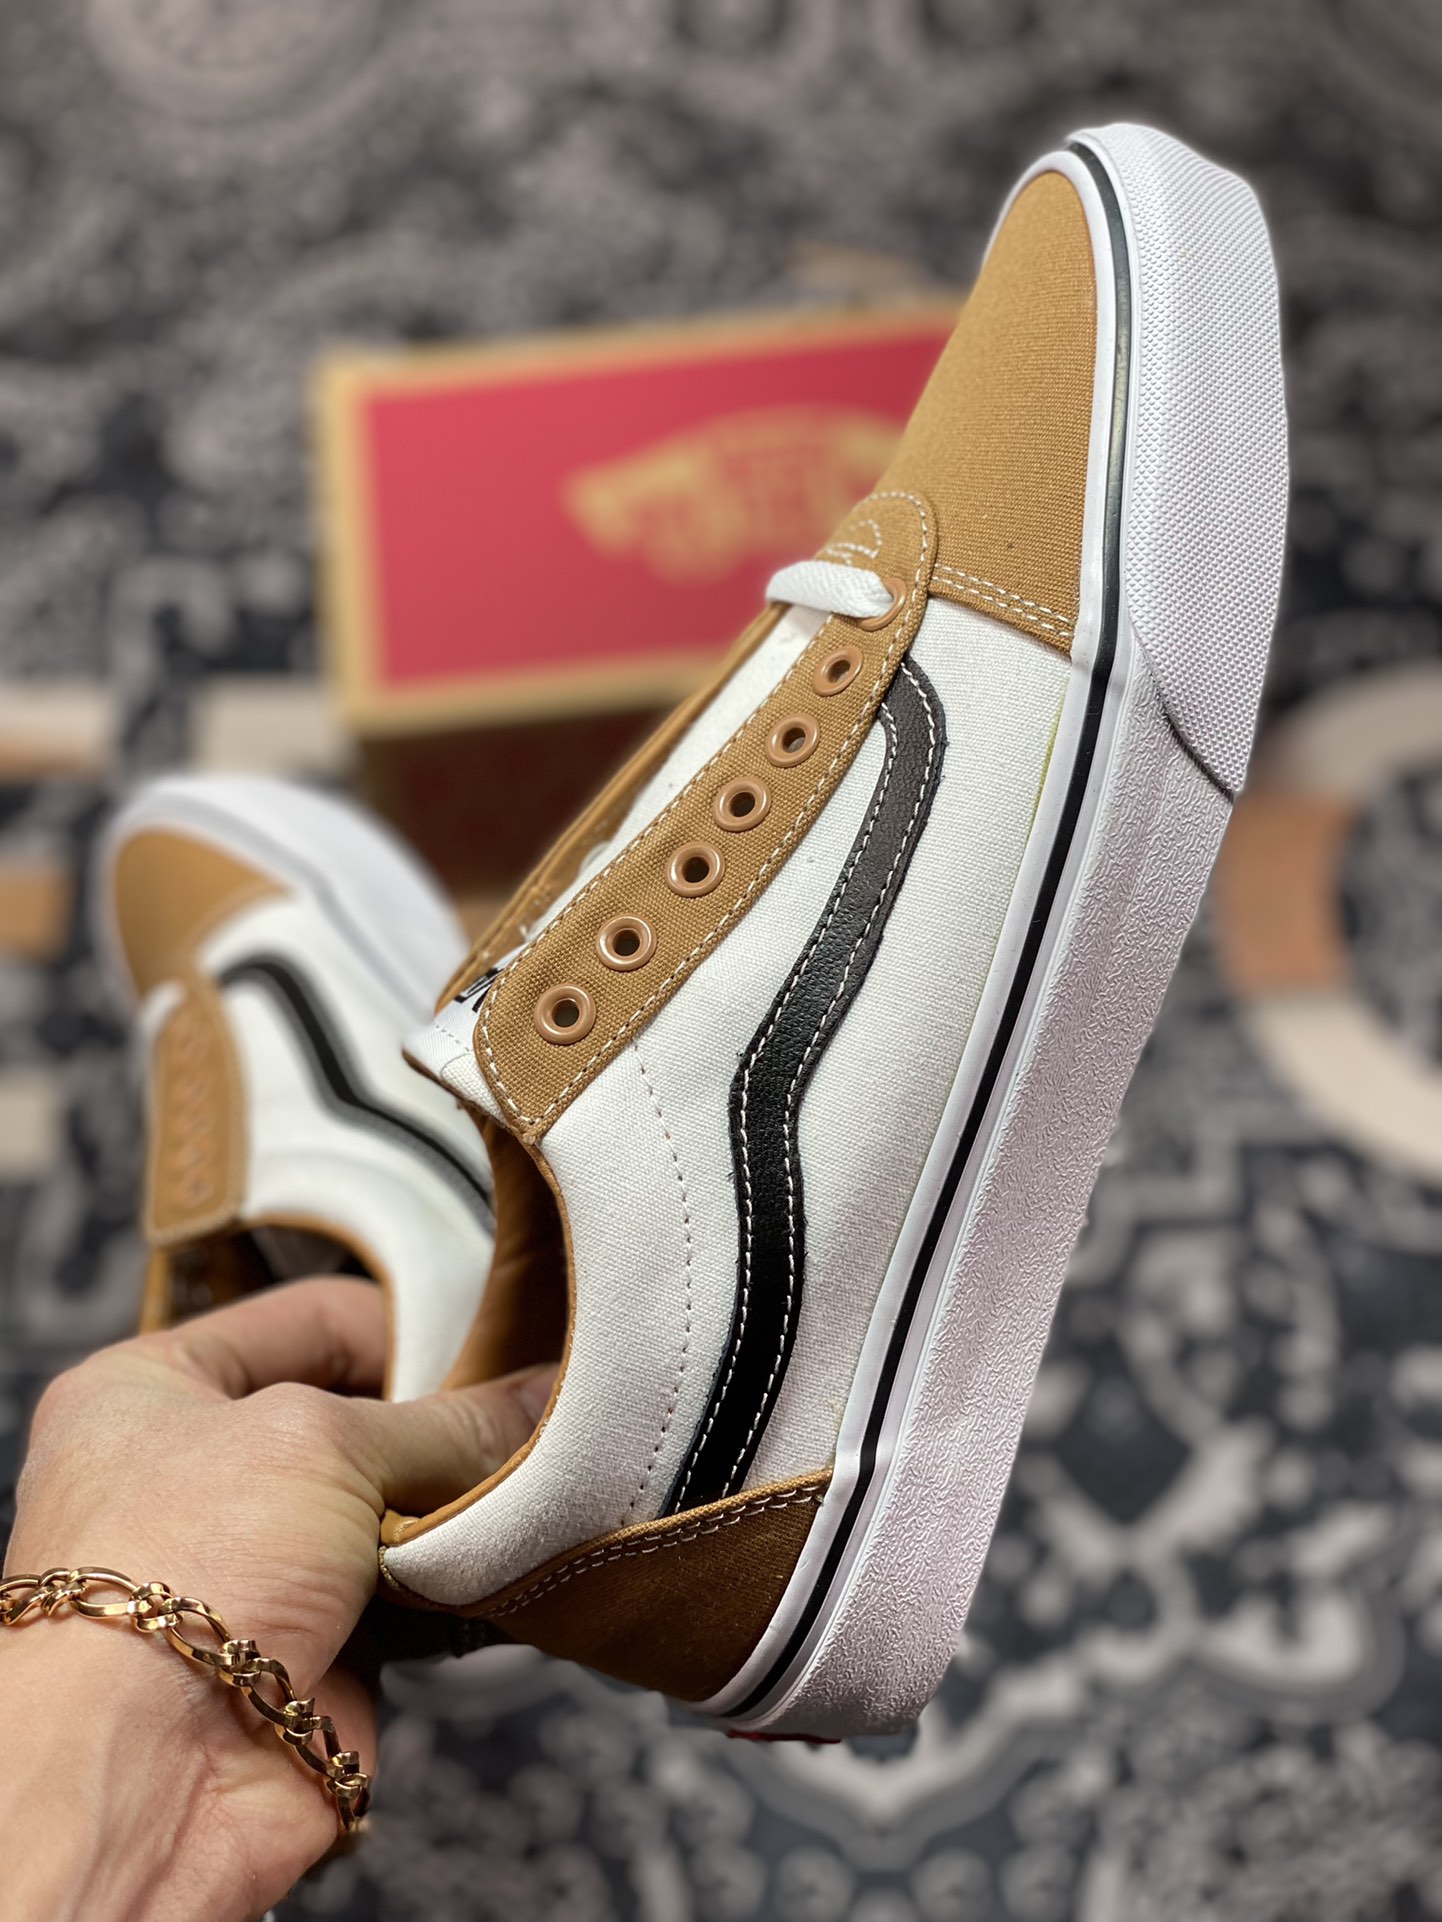 Vans Ward retro coffee brown color matching official synchronized Vans sports and leisure series